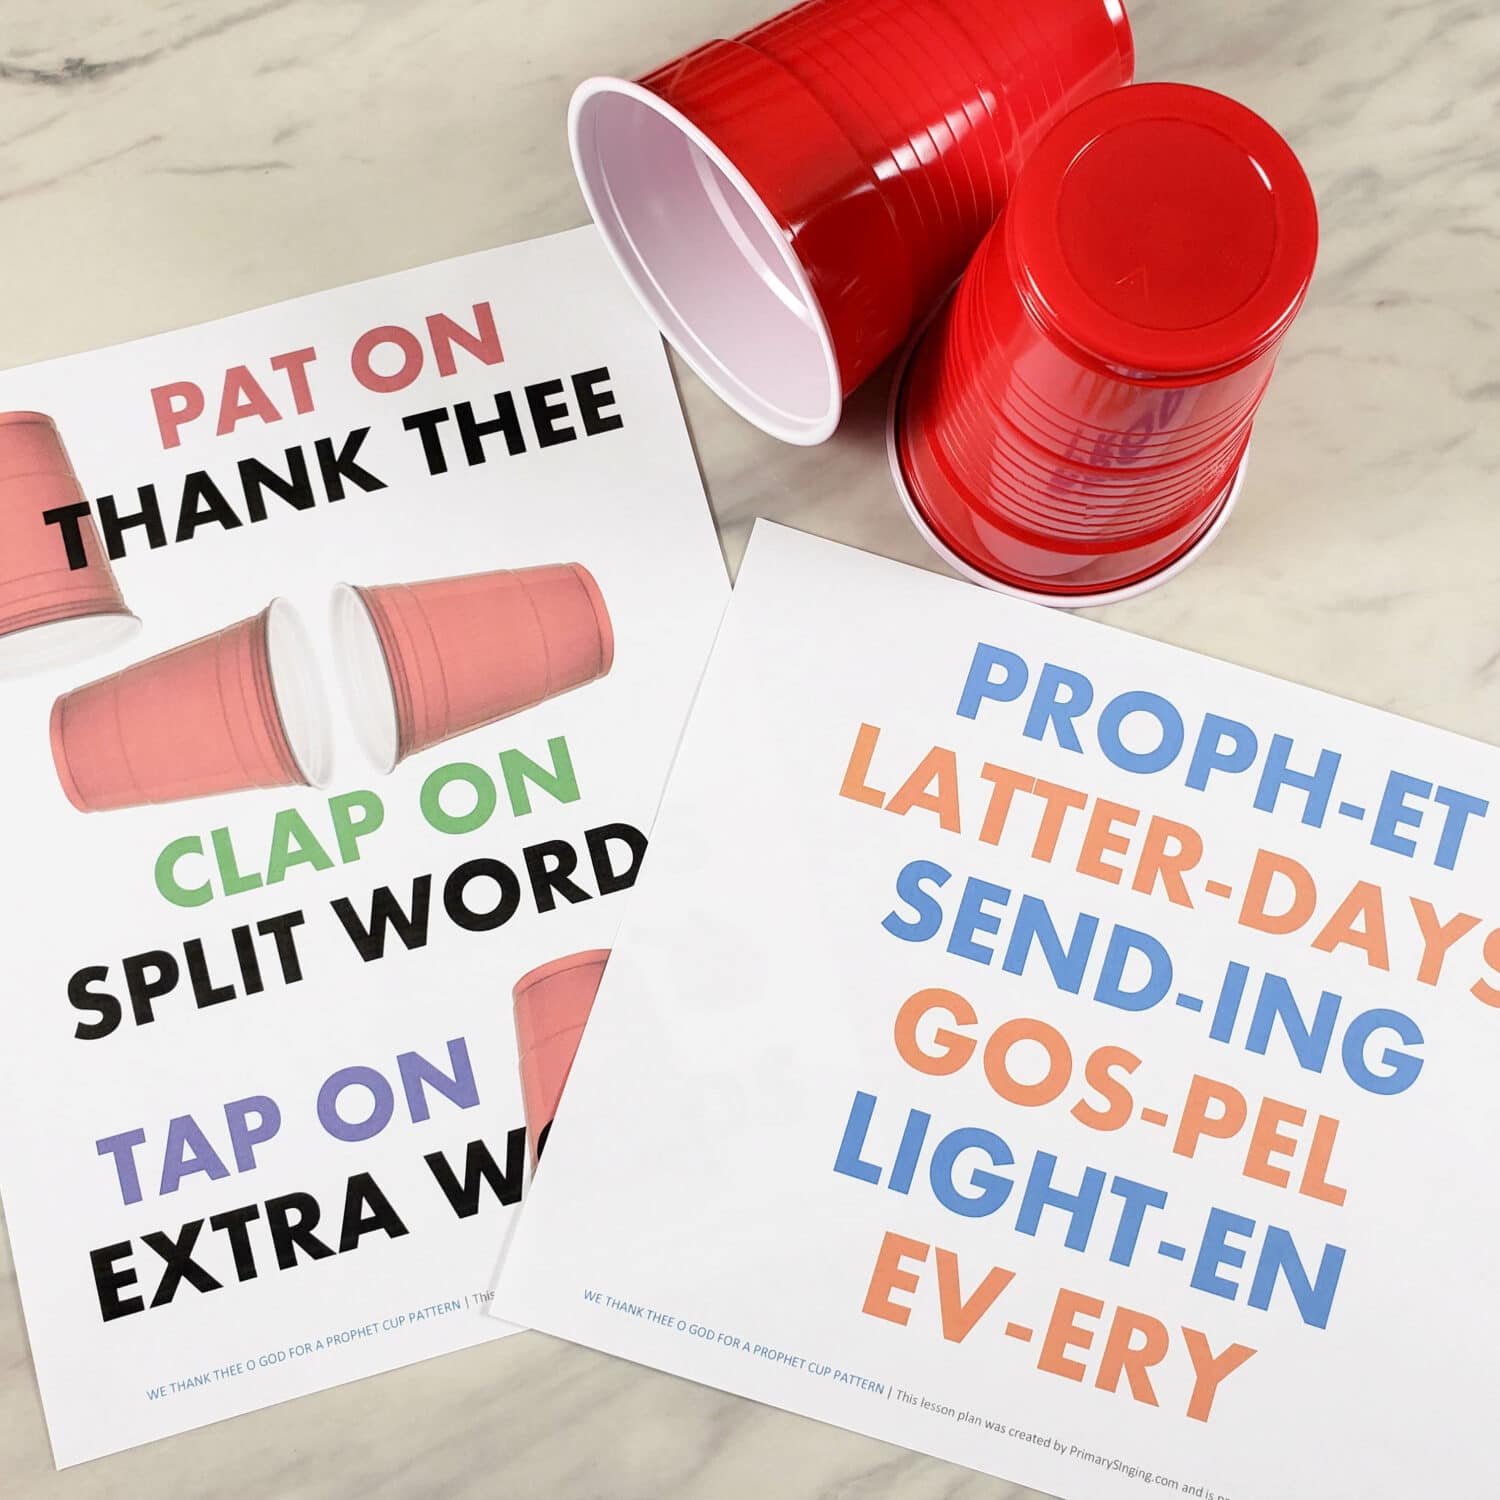 We Thank Thee O God for a Prophet Cup Actions singing time idea - Try these 3 patterns to give the kids a challenge with movement and music while teaching this song for LDS Primary Music Leaders. See our printable song helps now!